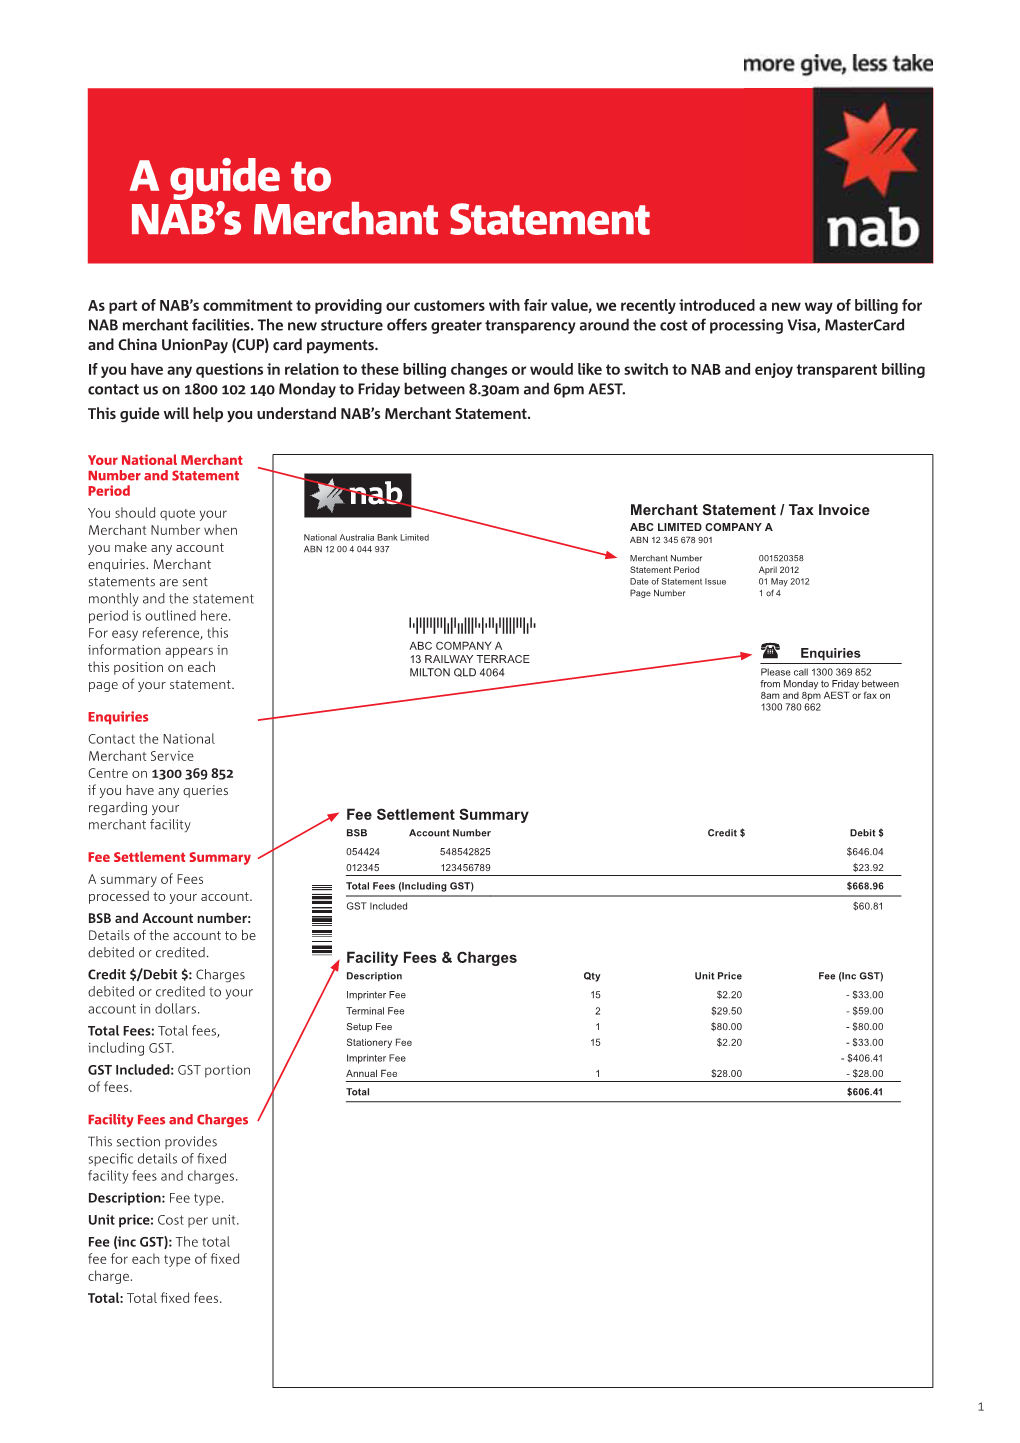 A Guide to NAB's Merchant Statement